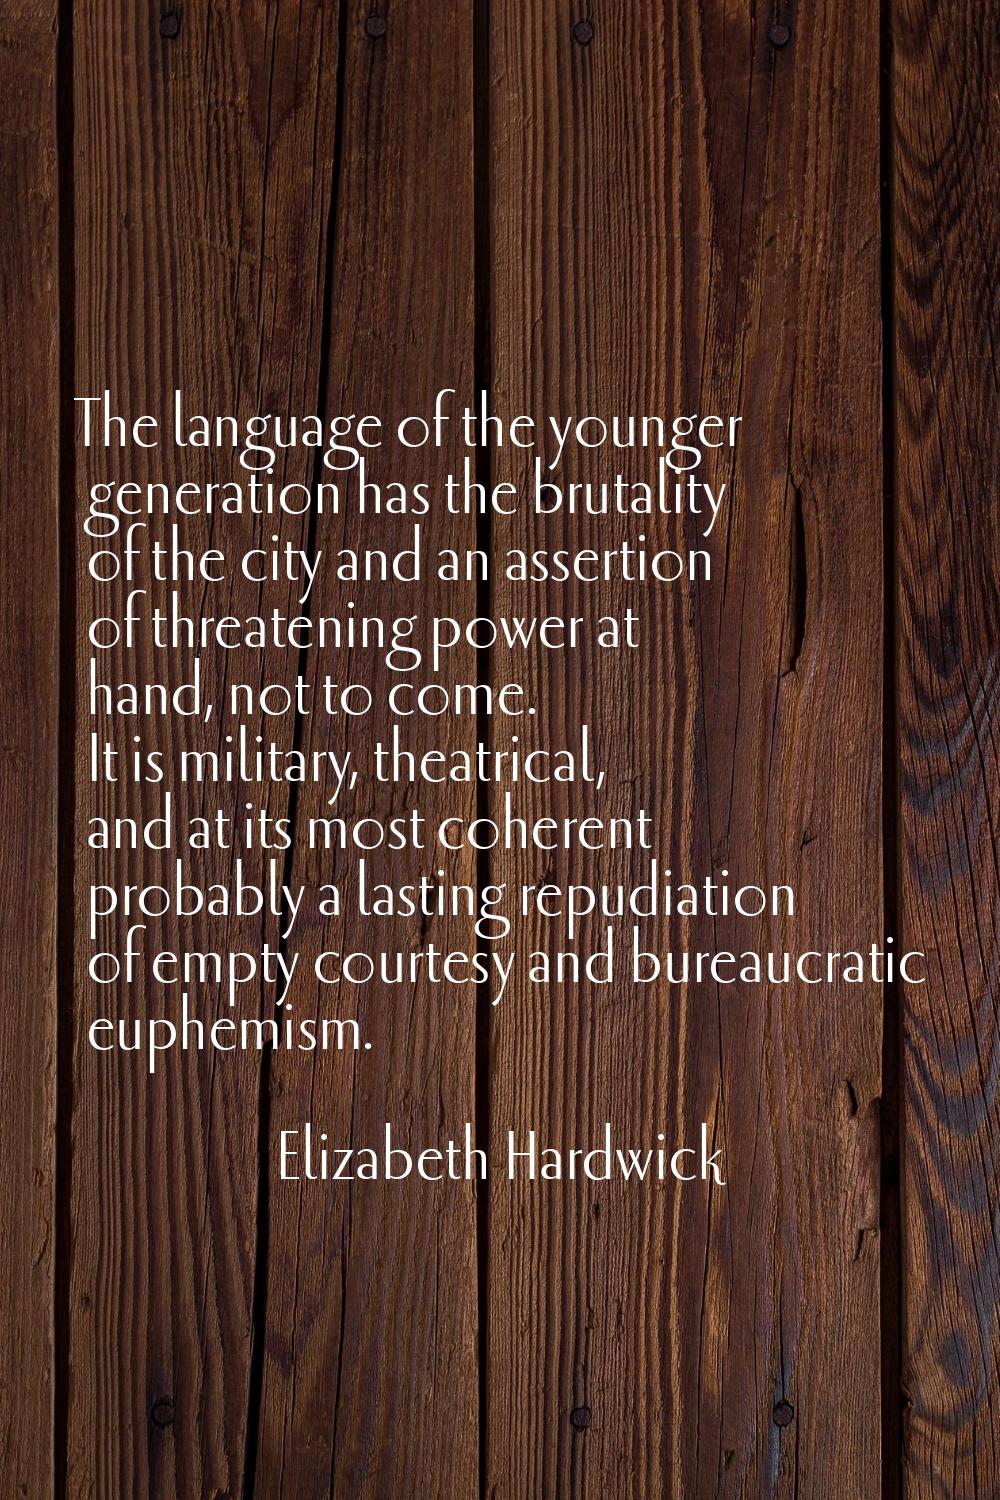 The language of the younger generation has the brutality of the city and an assertion of threatenin